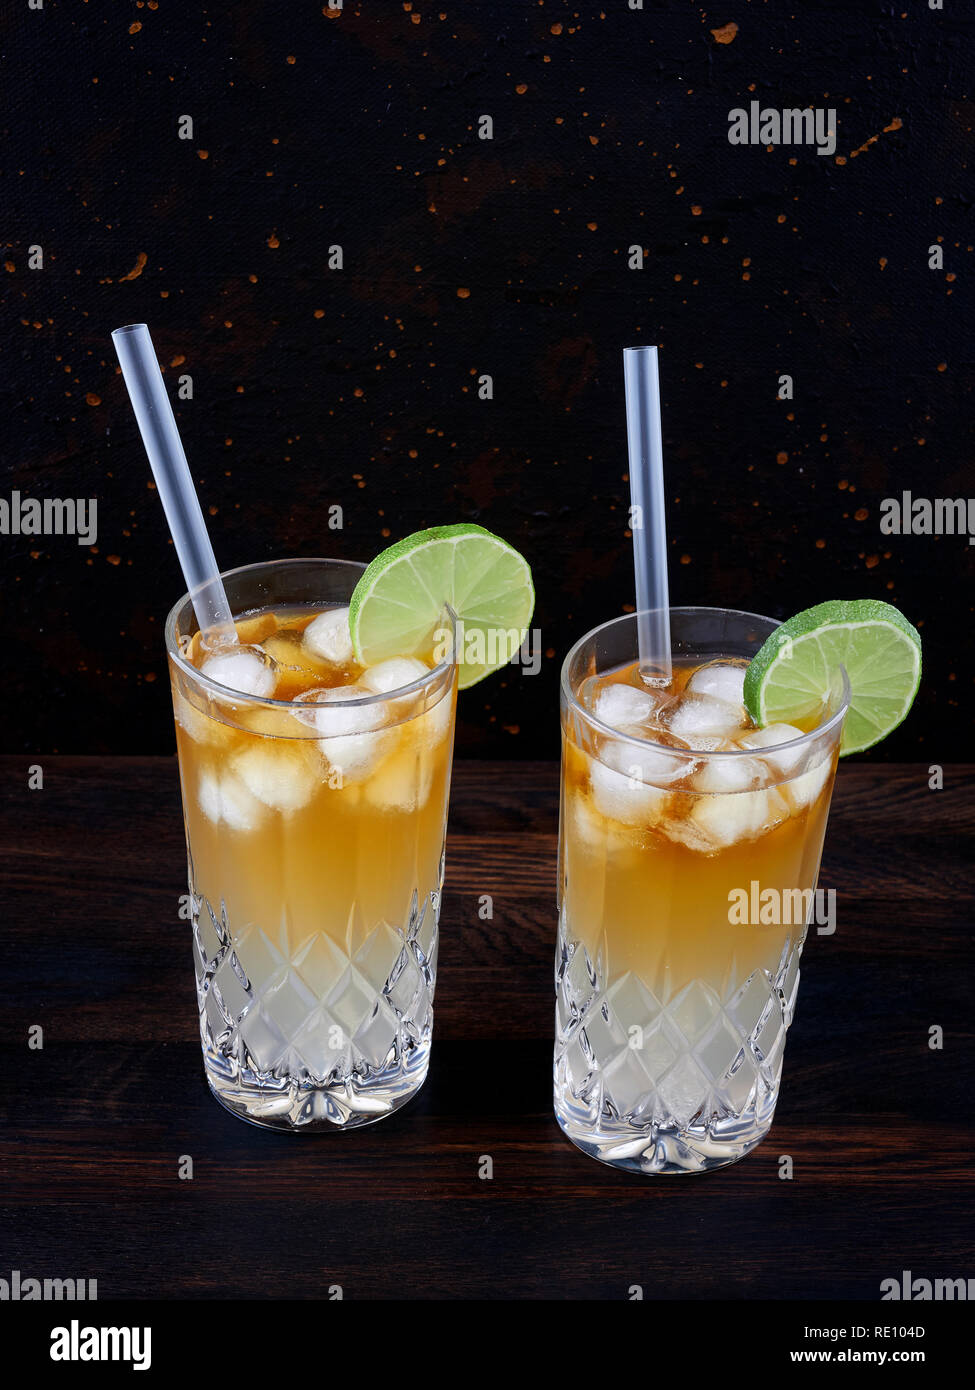 Dark 'n' stormy, a cocktail made using dark rum, ginger ale or beer, served in a highball glass filled with ice and garnished with a slice of lime Stock Photo